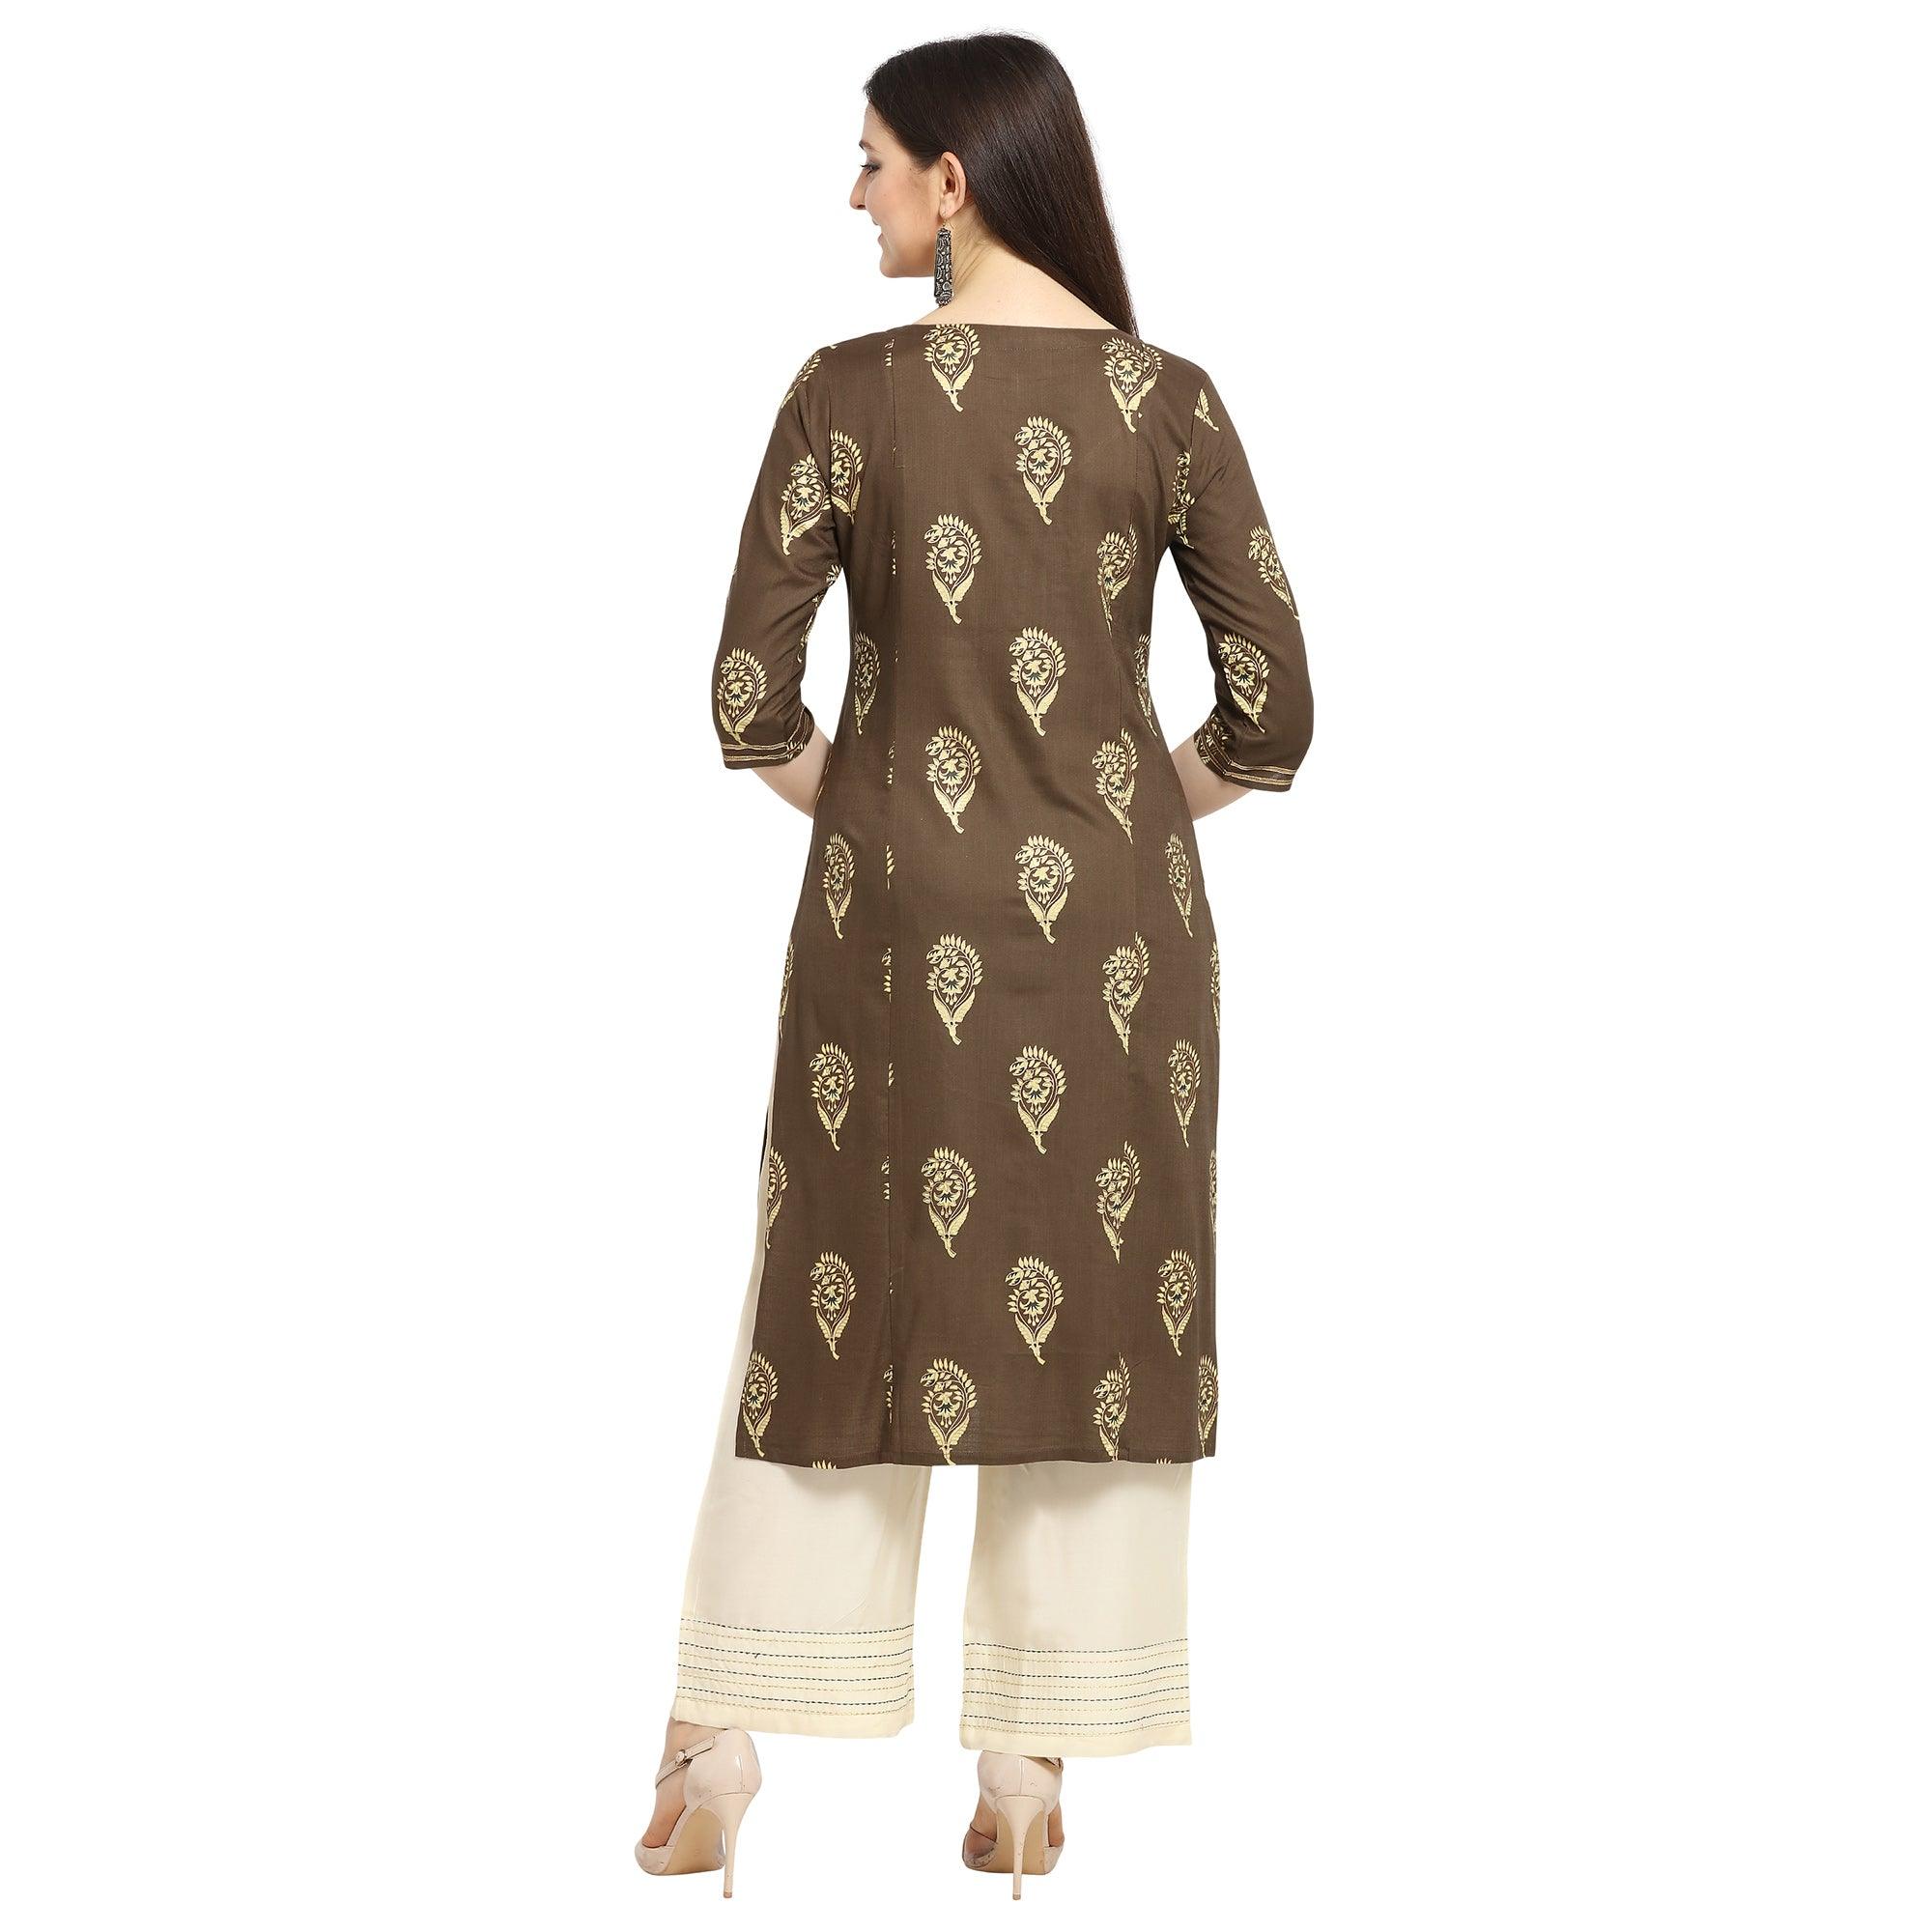 Glowing Brown Colored Casual Wear Printed Cotton Kurti-Palazzo Suit - Peachmode